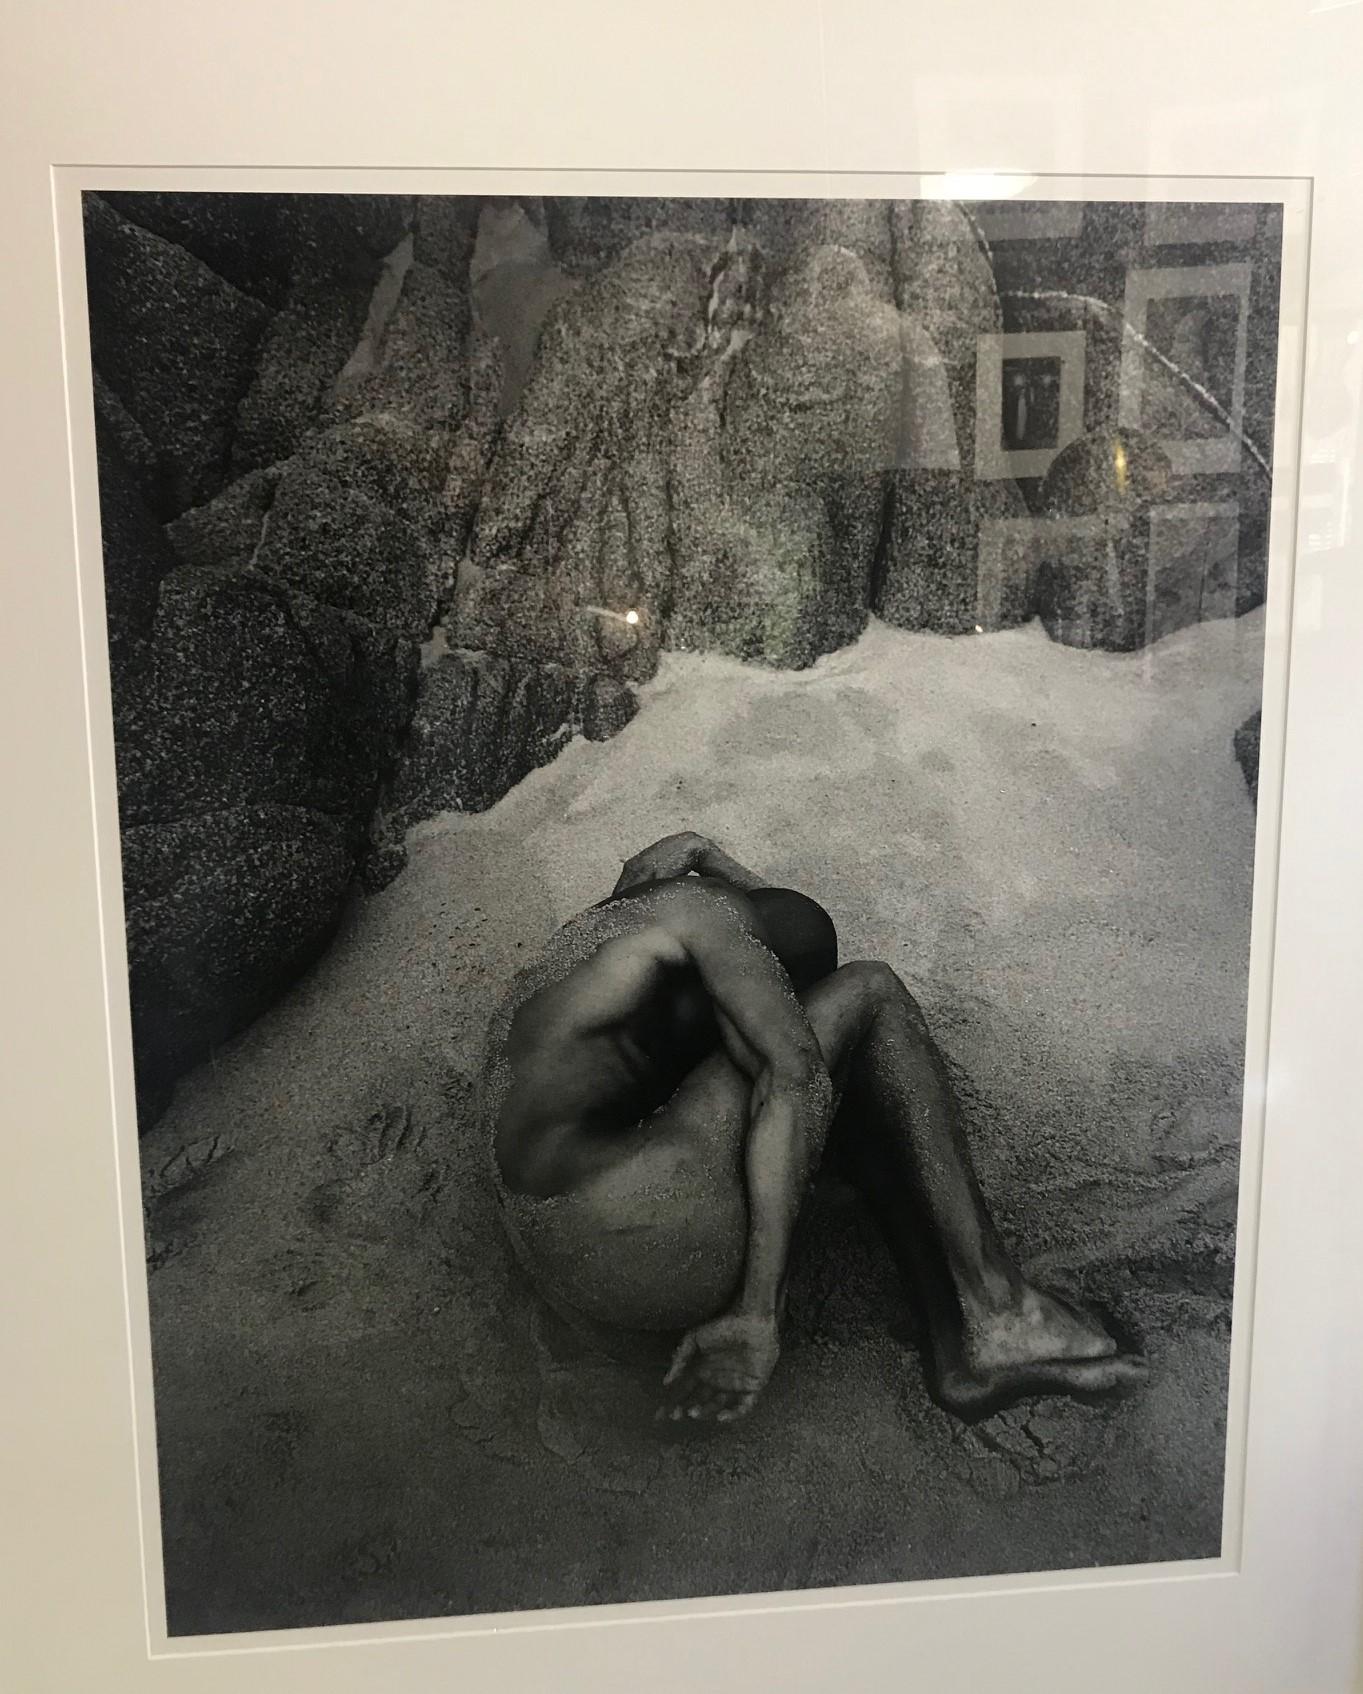 A gorgeously composed, richly toned, nude silver gelatin print or image by renowned American Fine Art and iconic fashion or celebrity photographer Cliff Watts. This image is from his book 